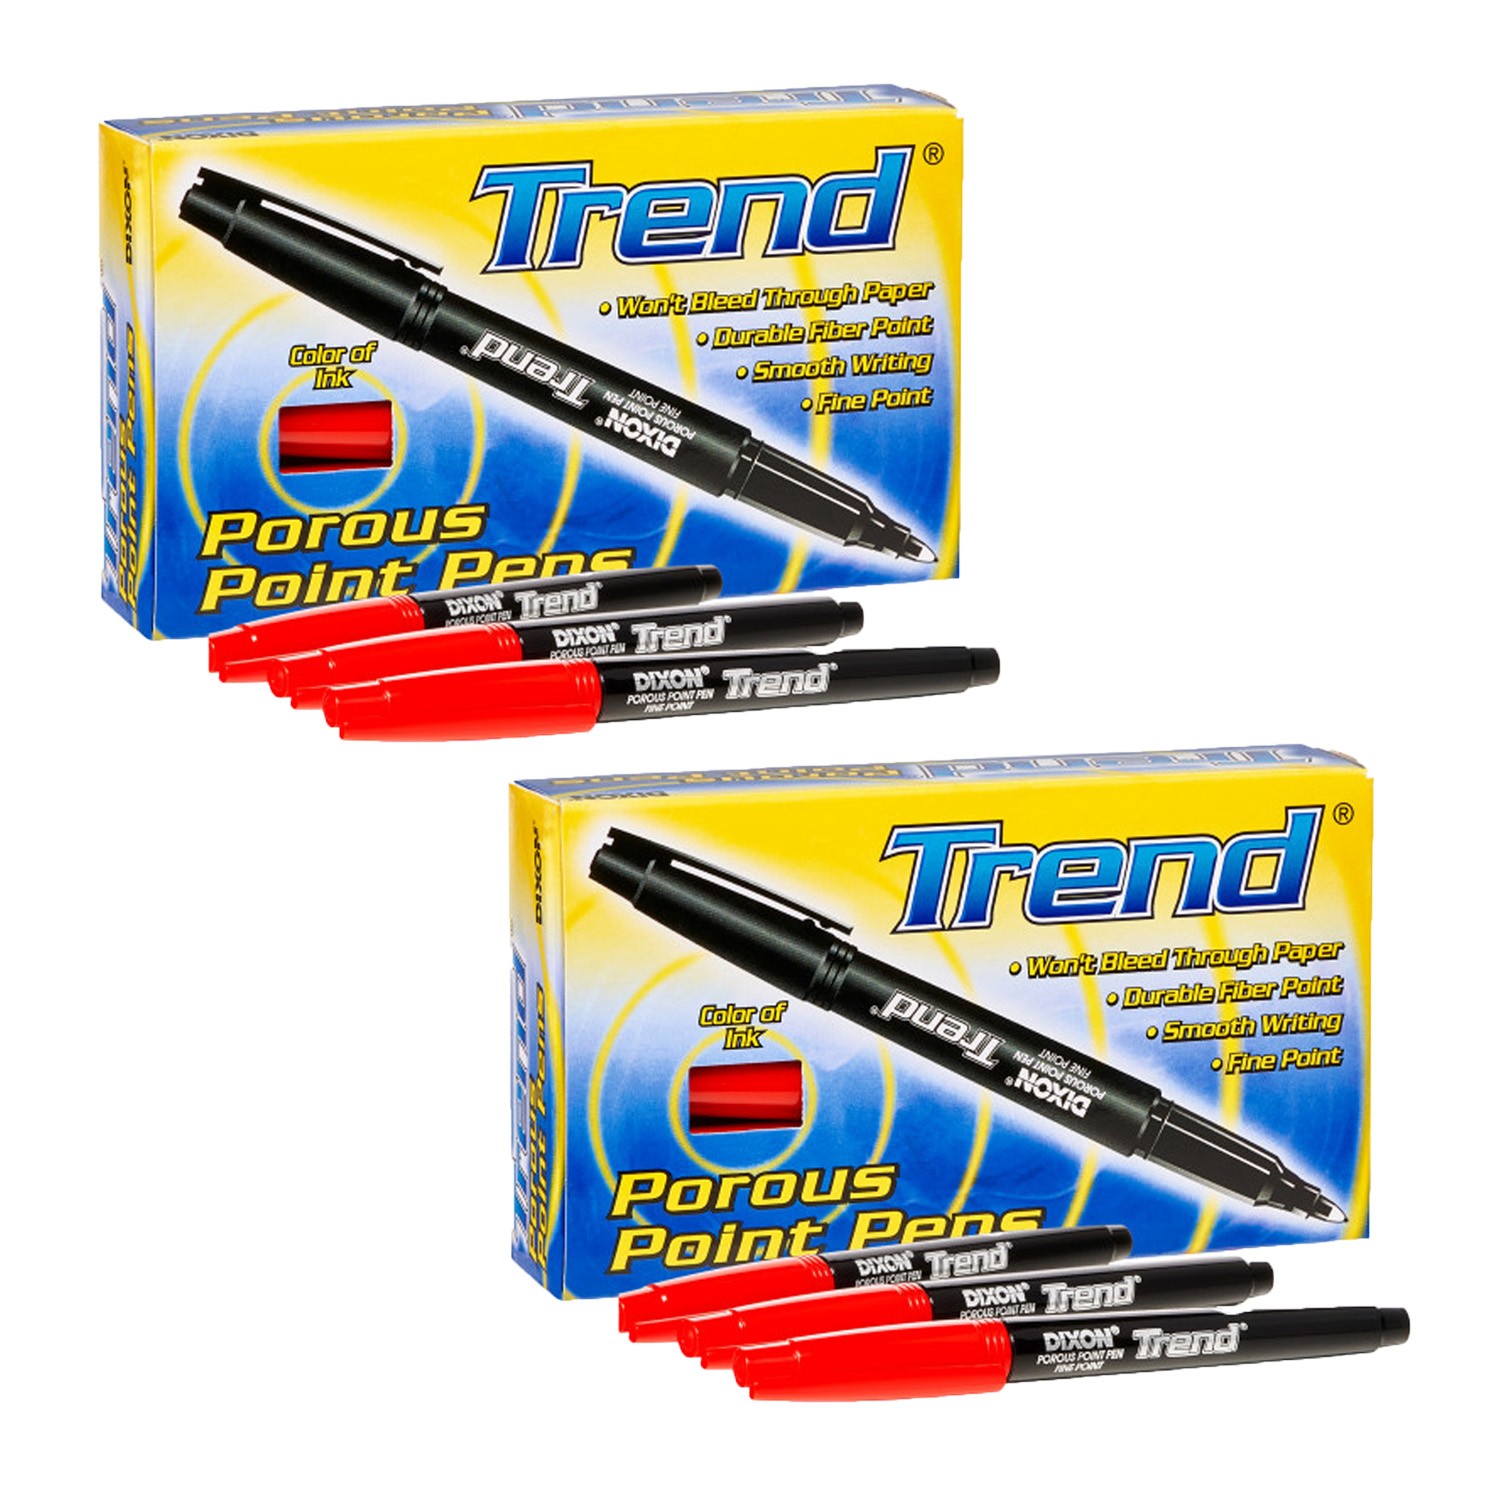 Trend Porous Point Pens, Red, 12 Per Pack, 2 Packs